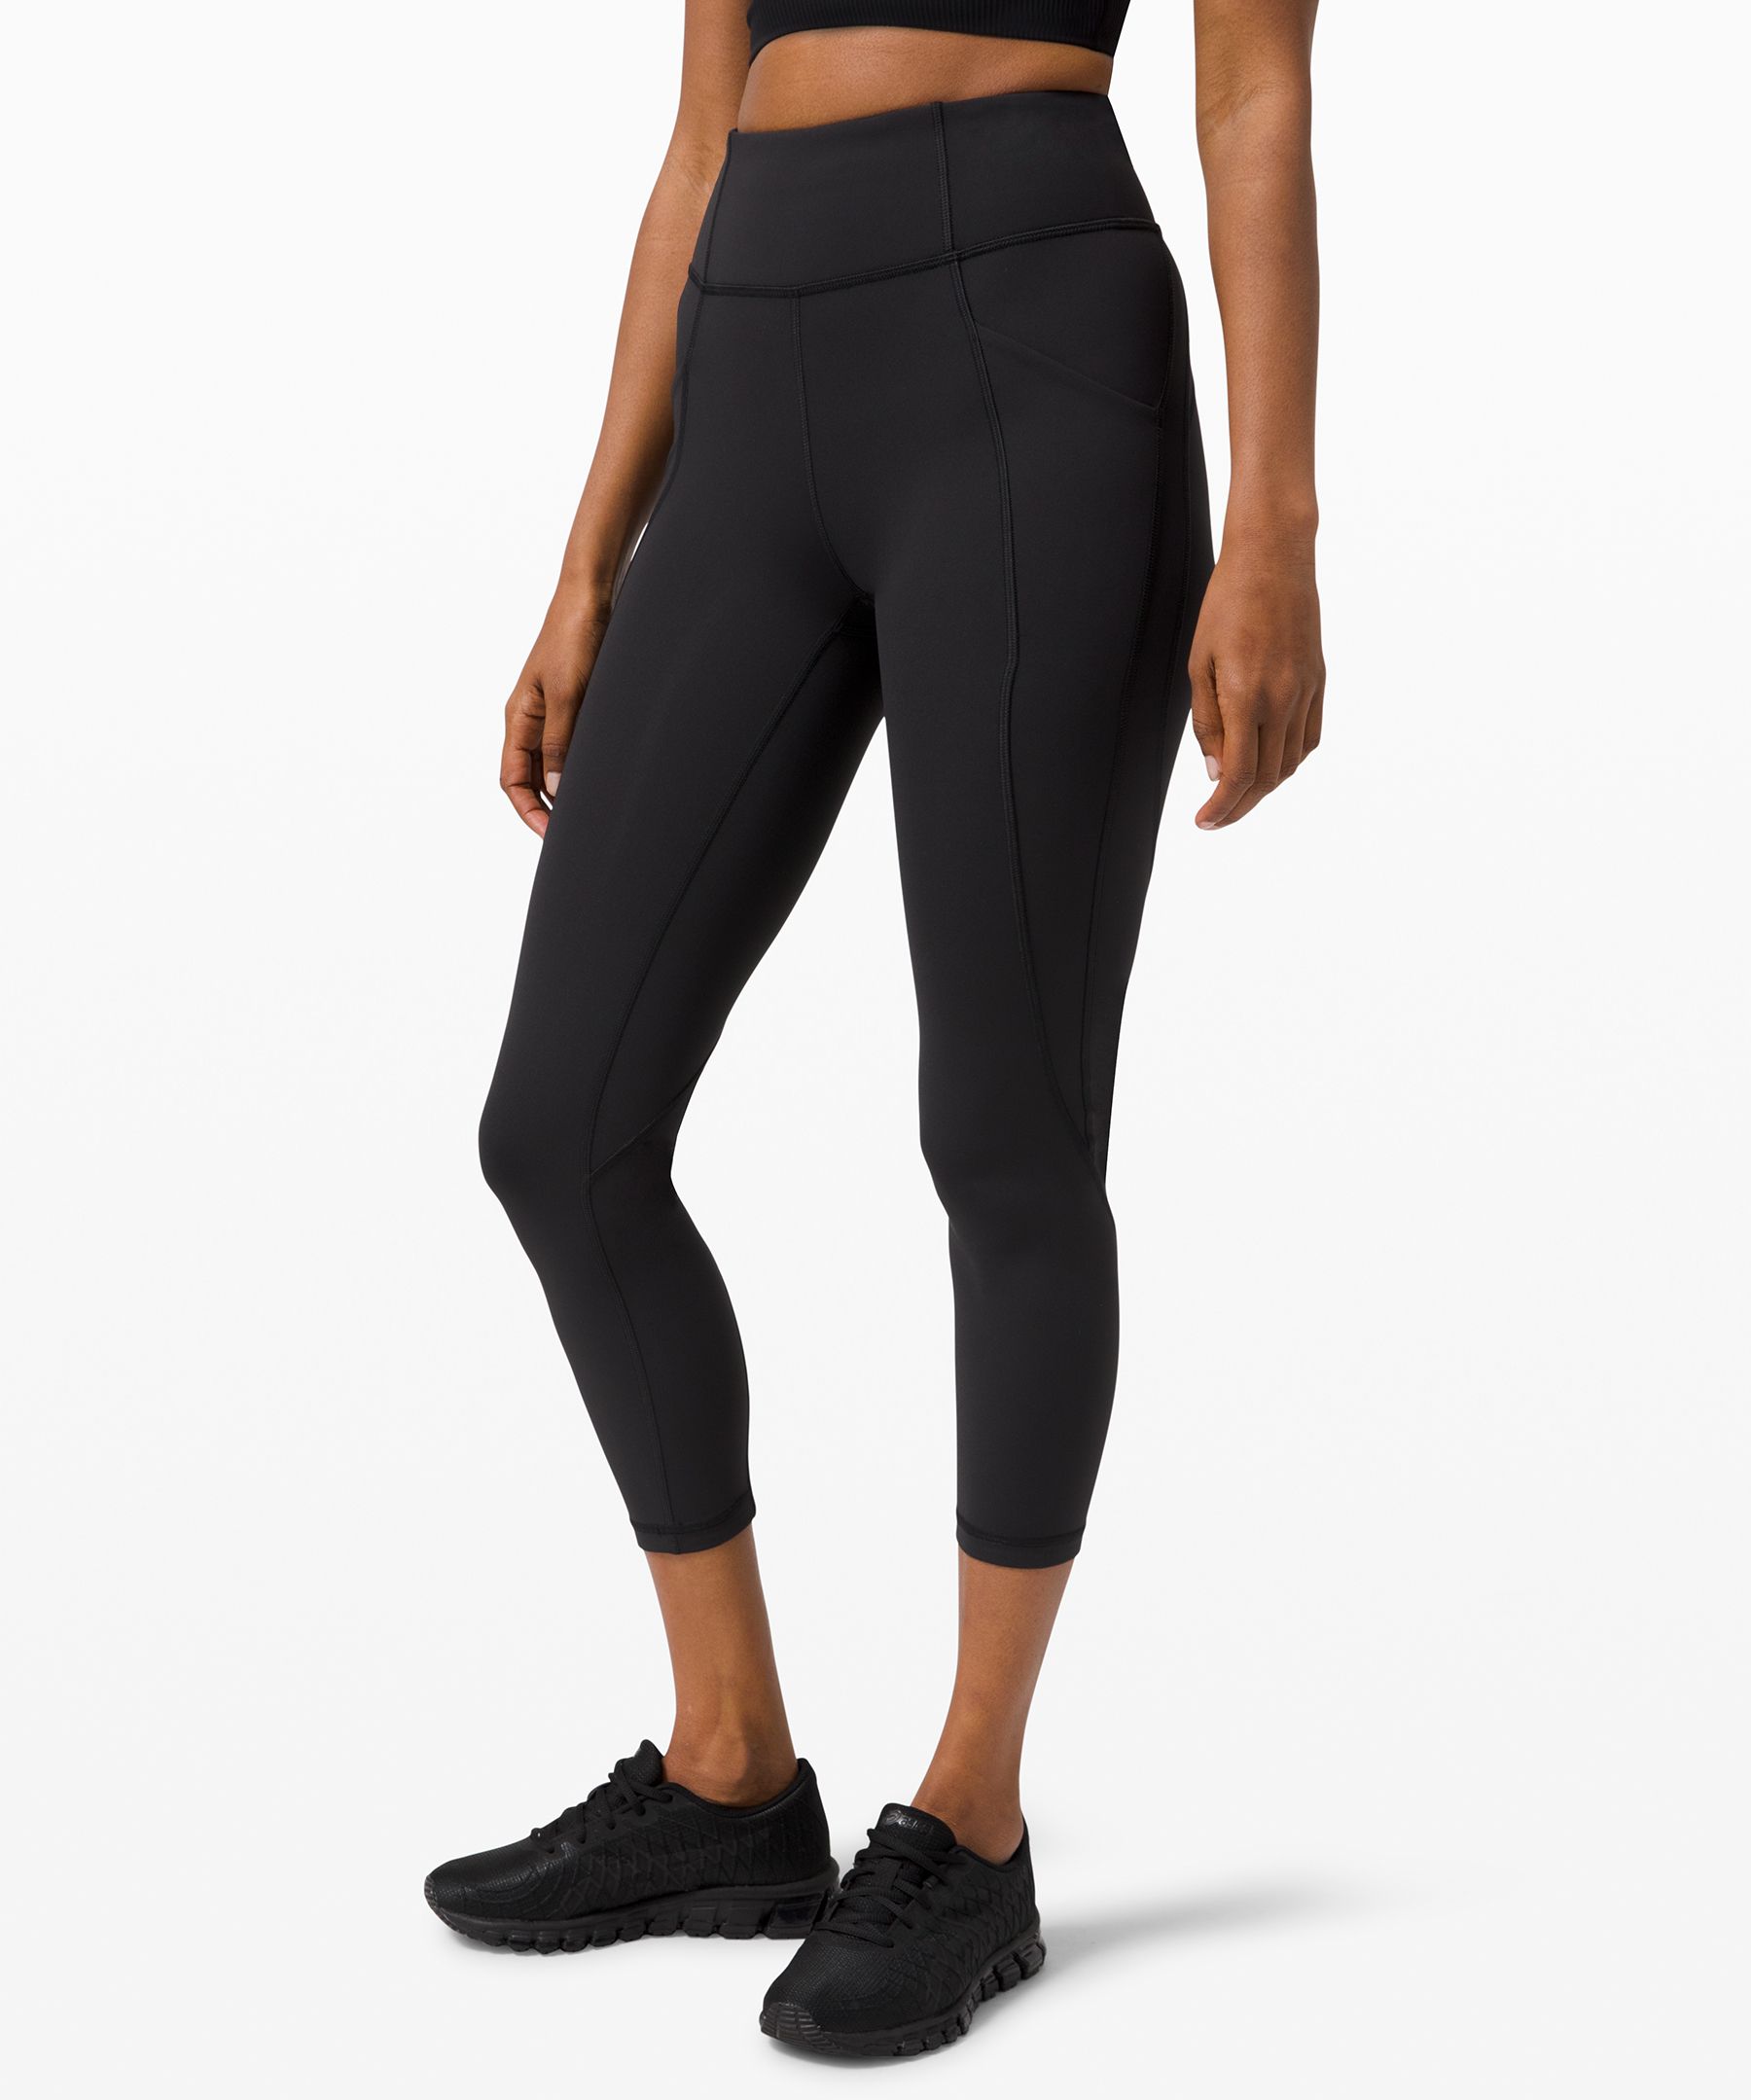 lululemon time to sweat crop review